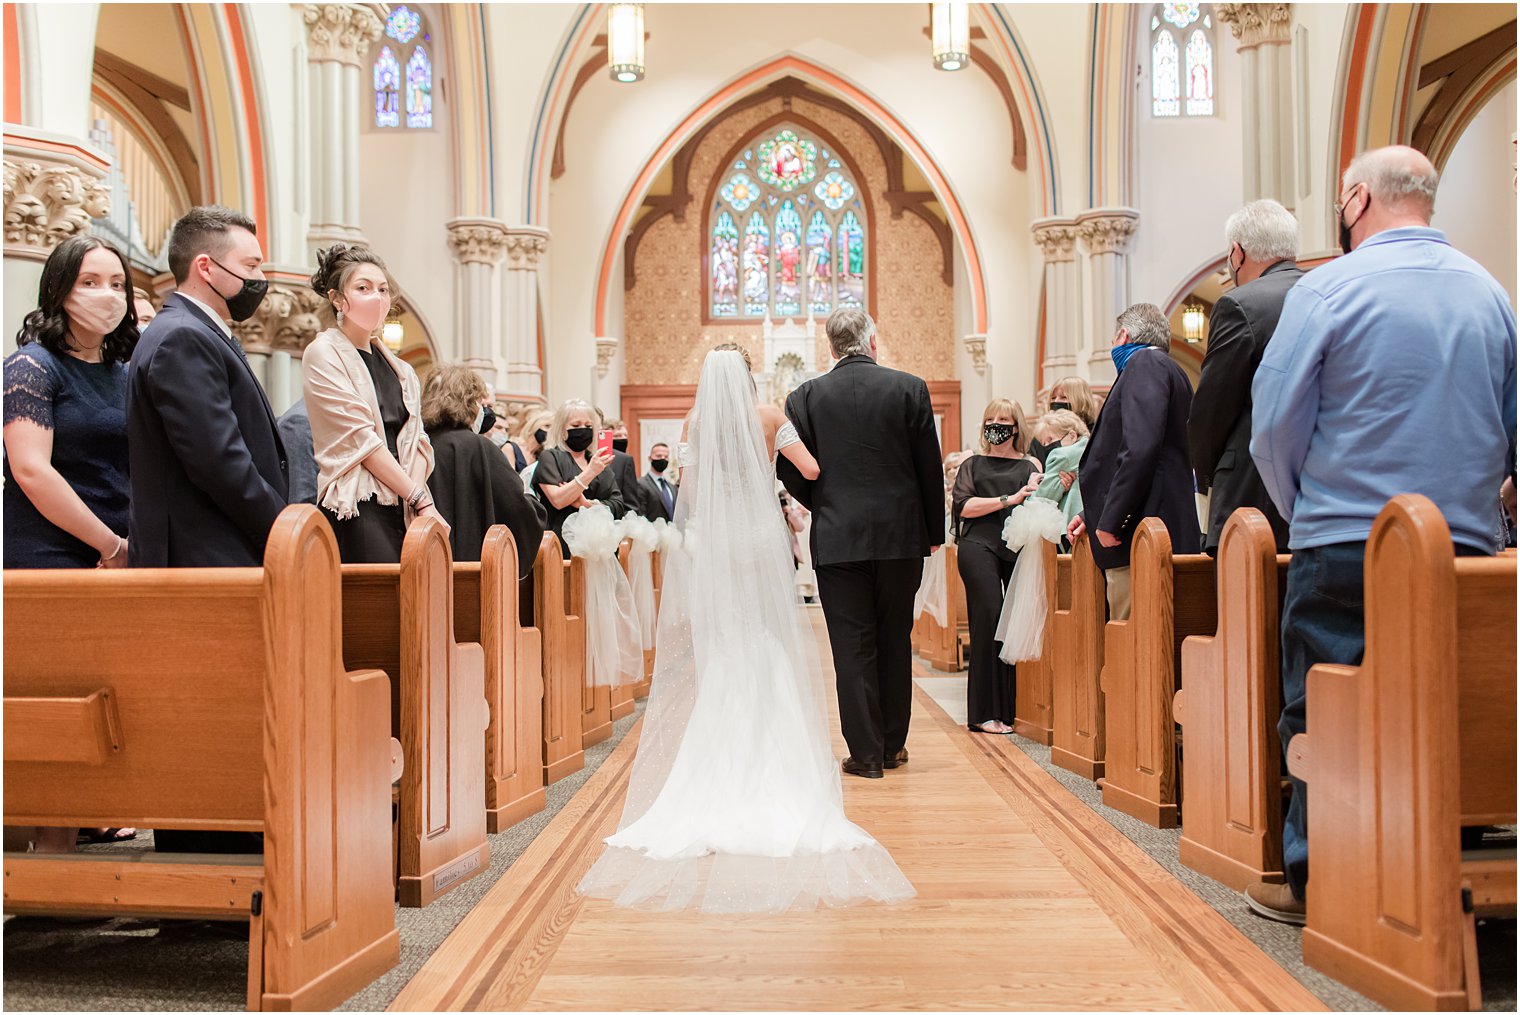 father walks bride down aisle at St. Vincent's Martyr Catholic Church